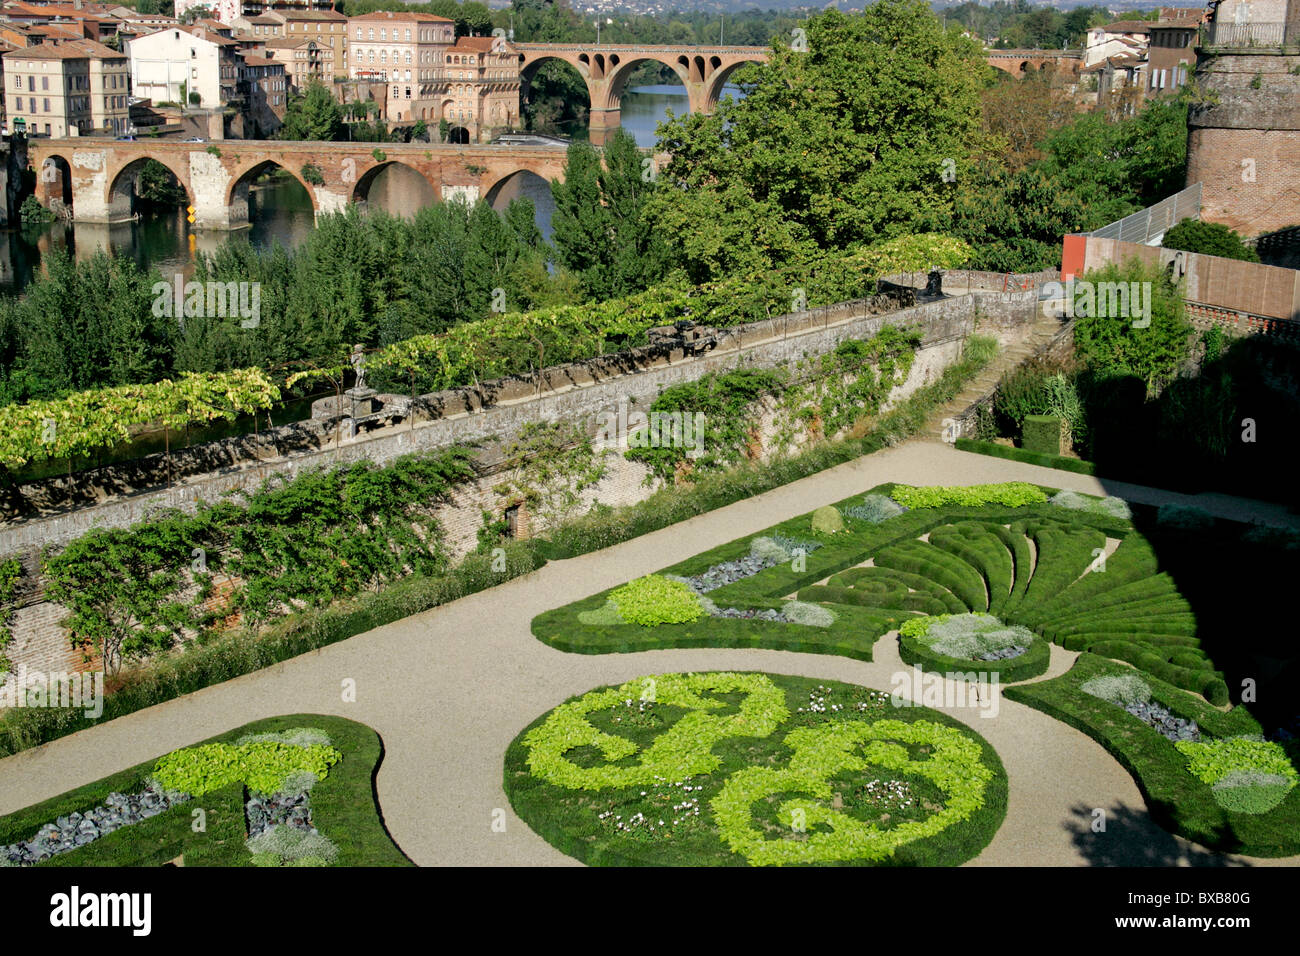 Palace gardens Toulouse Lautrec Museum overlooking Tarn River, Albi, France, Europe Stock Photo